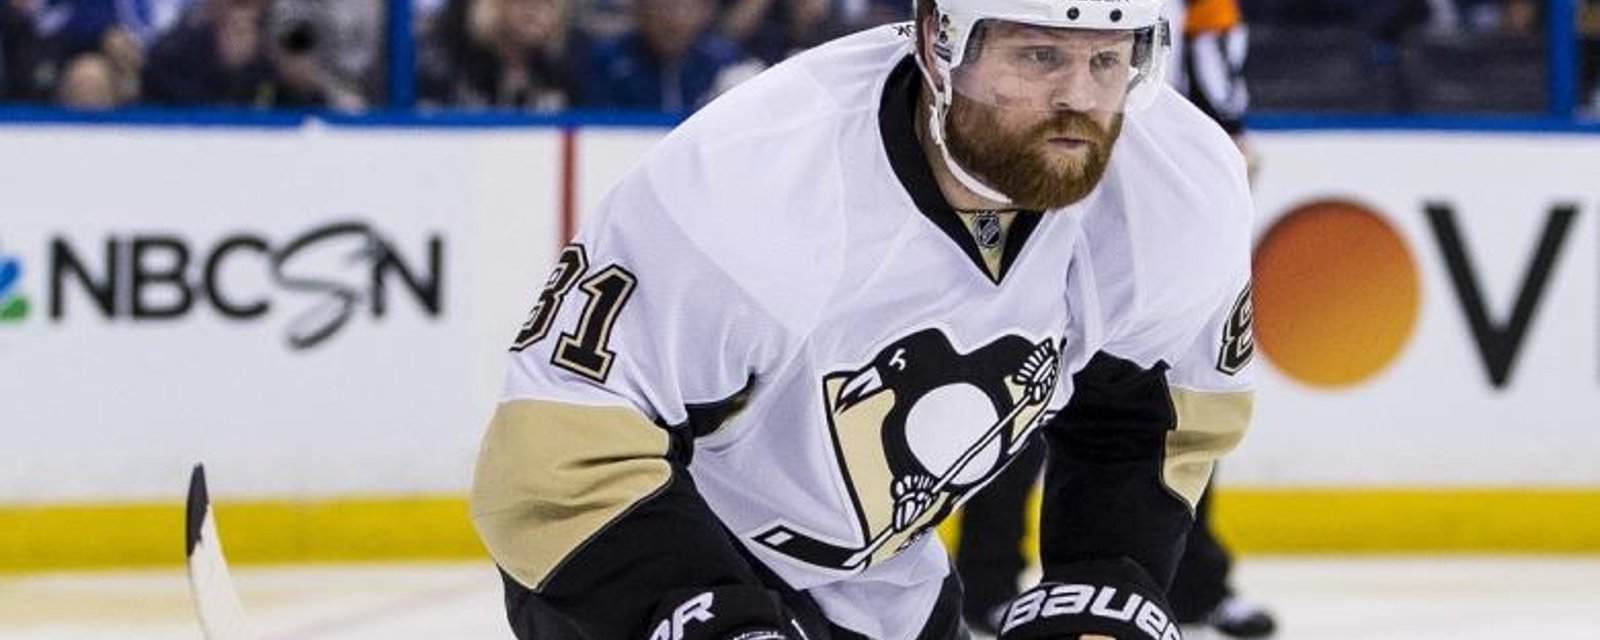 Only two NHL players appear at Phil Kessel's Stanley Cup celebration.